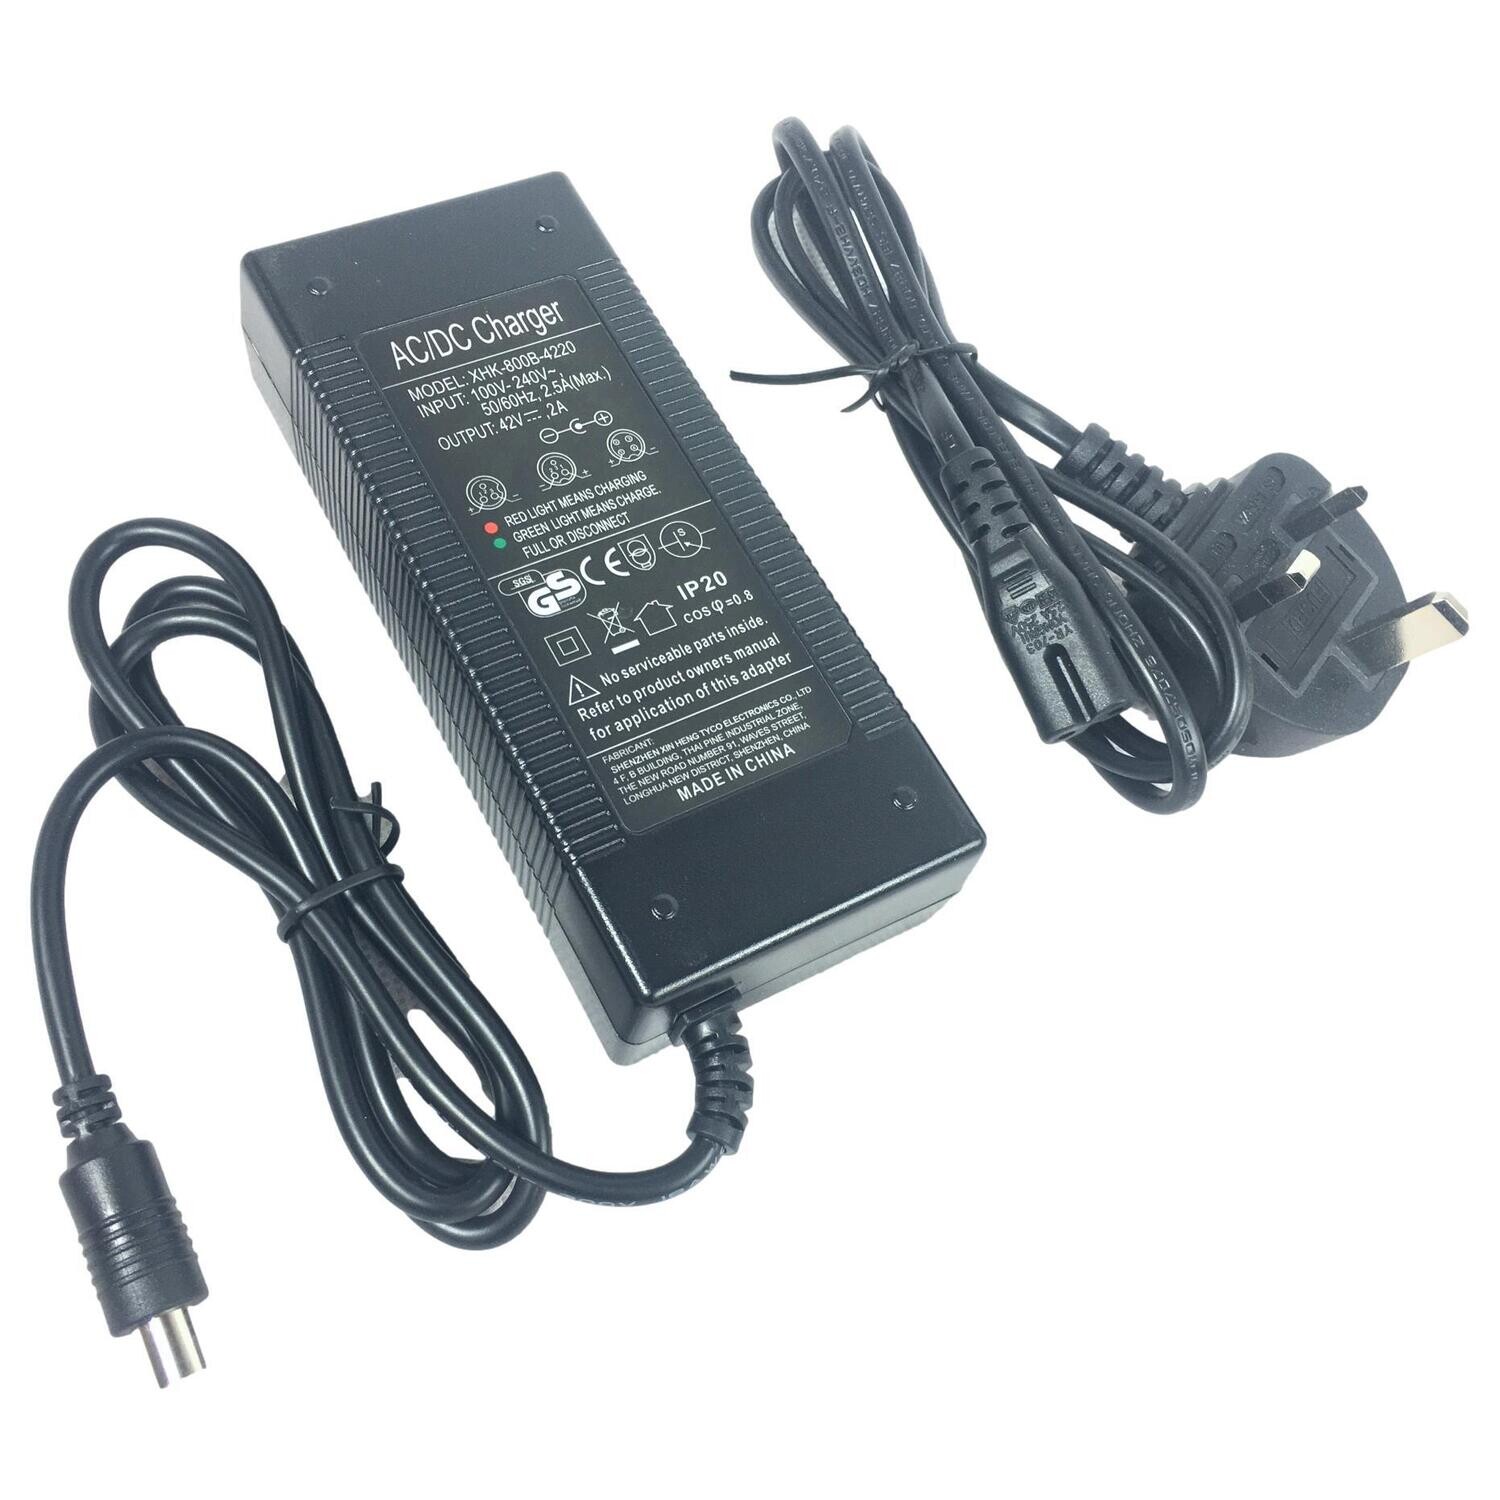 Battery Charger For Segway Drift W1 S-Plus Loomo Robot 42V 2A UK Plug